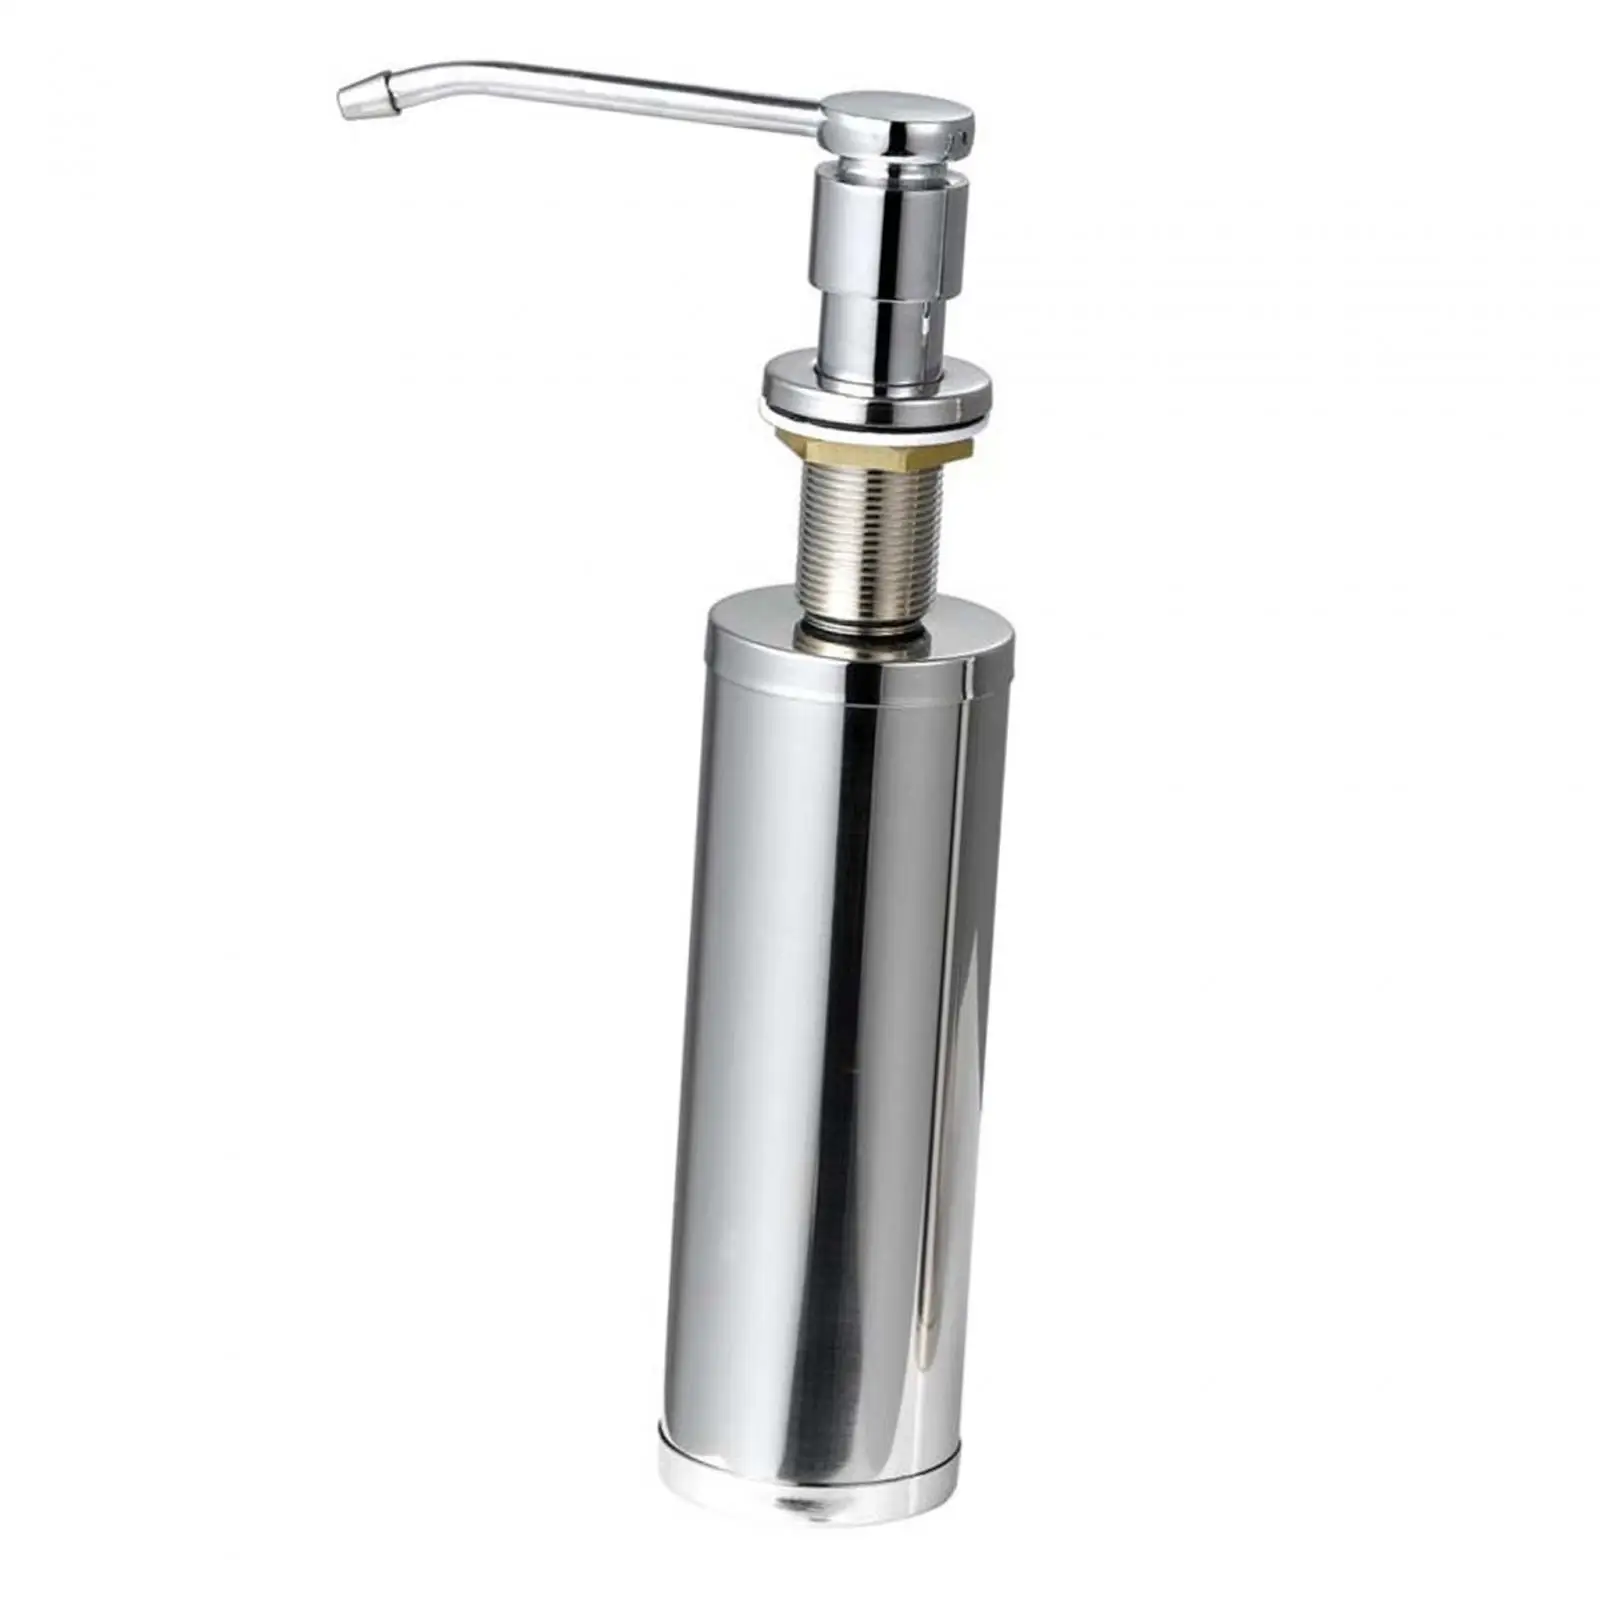 Dish Lotion Sink Dispenser Refill from The Top Built in Sink Soap Dispenser